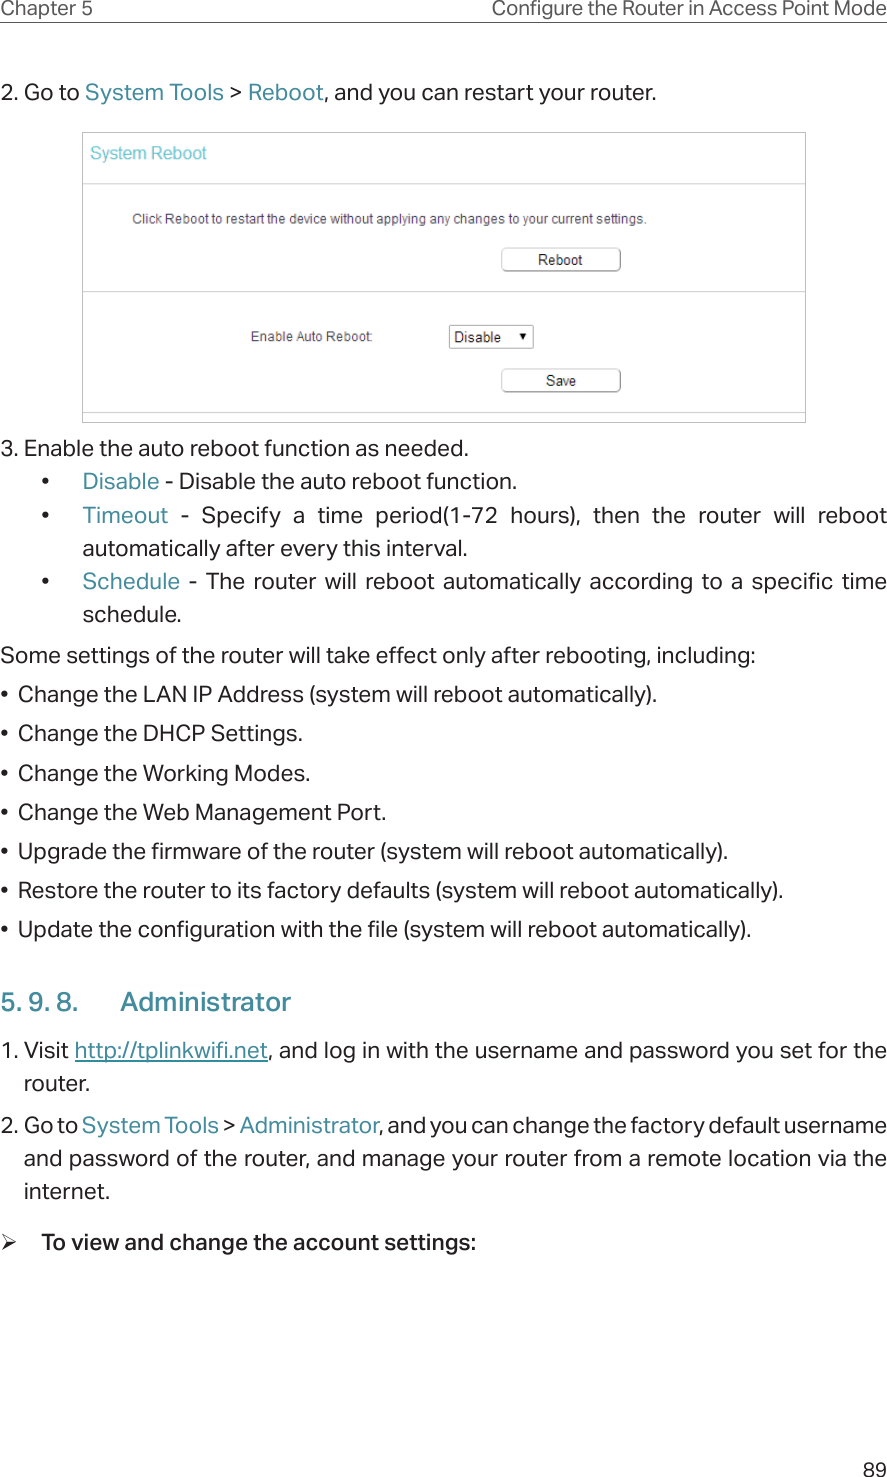 89Chapter 5 &amp;RQƮJXUHWKH5RXWHULQ$FFHVV3RLQW0RGH2. Go to System Tools &gt; Reboot, and you can restart your router.3. Enable the auto reboot function as needed. •  Disable - Disable the auto reboot function.•  Timeout  - Specify a time period(1-72 hours), then the router will reboot automatically after every this interval.•  Schedule - The router will reboot automatically according to a specific time schedule.Some settings of the router will take effect only after rebooting, including:•  Change the LAN IP Address (system will reboot automatically).•  Change the DHCP Settings.•  Change the Working Modes.•  Change the Web Management Port.•  Upgrade the firmware of the router (system will reboot automatically).•  Restore the router to its factory defaults (system will reboot automatically).•  Update the configuration with the file (system will reboot automatically).5. 9. 8.  Administrator1. Visit http://tplinkwifi.net, and log in with the username and password you set for the router.2. Go to System Tools &gt; Administrator, and you can change the factory default username and password of the router, and manage your router from a remote location via the internet. ¾To view and change the account settings: